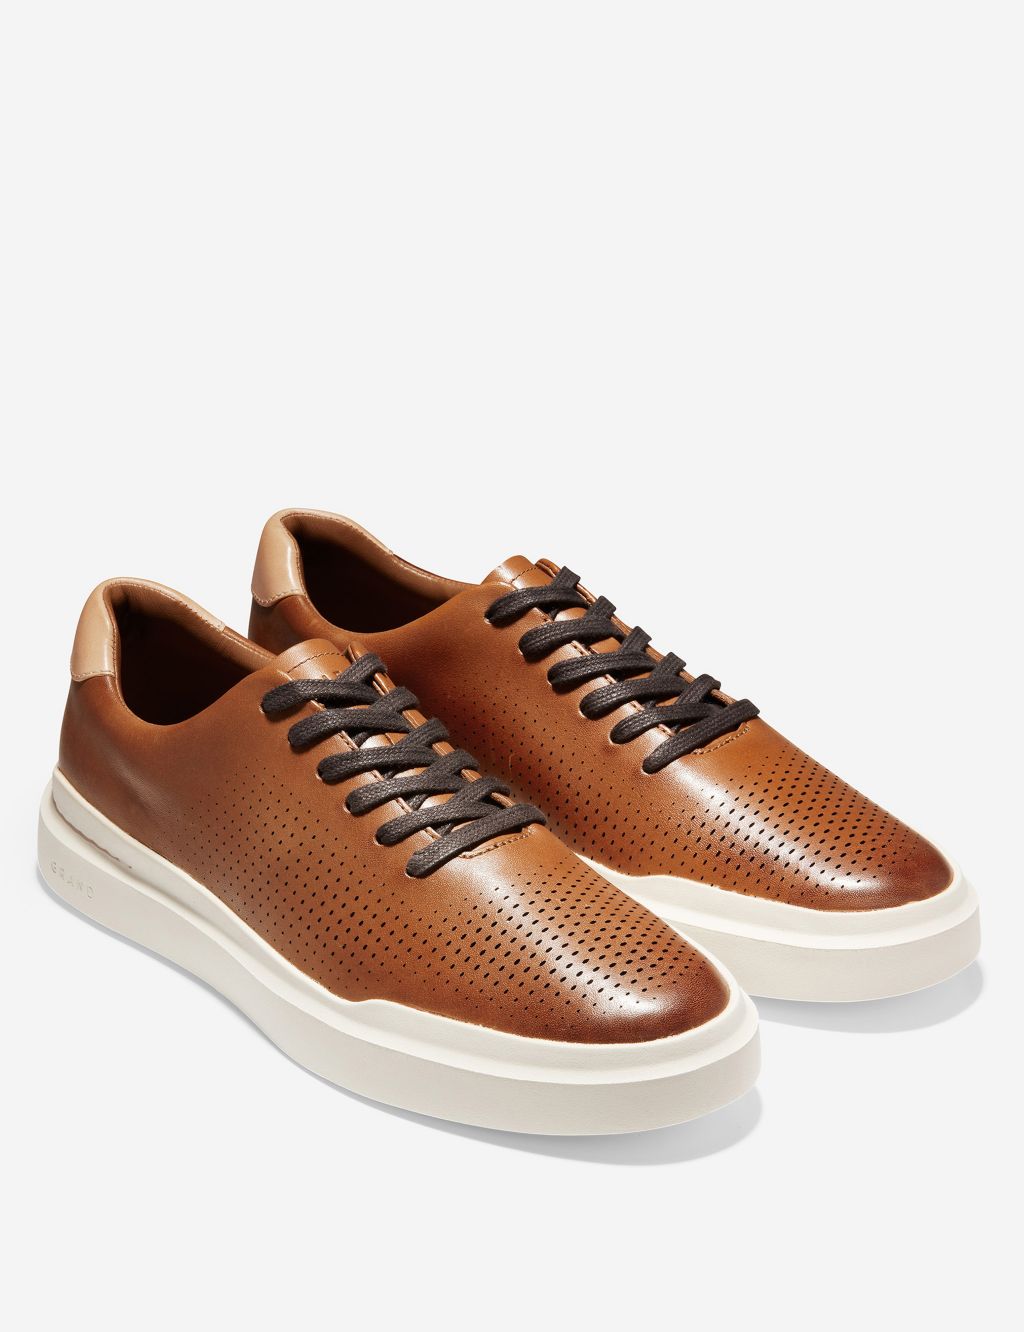 Grandpro Rally Leather Lace Up Trainers image 2